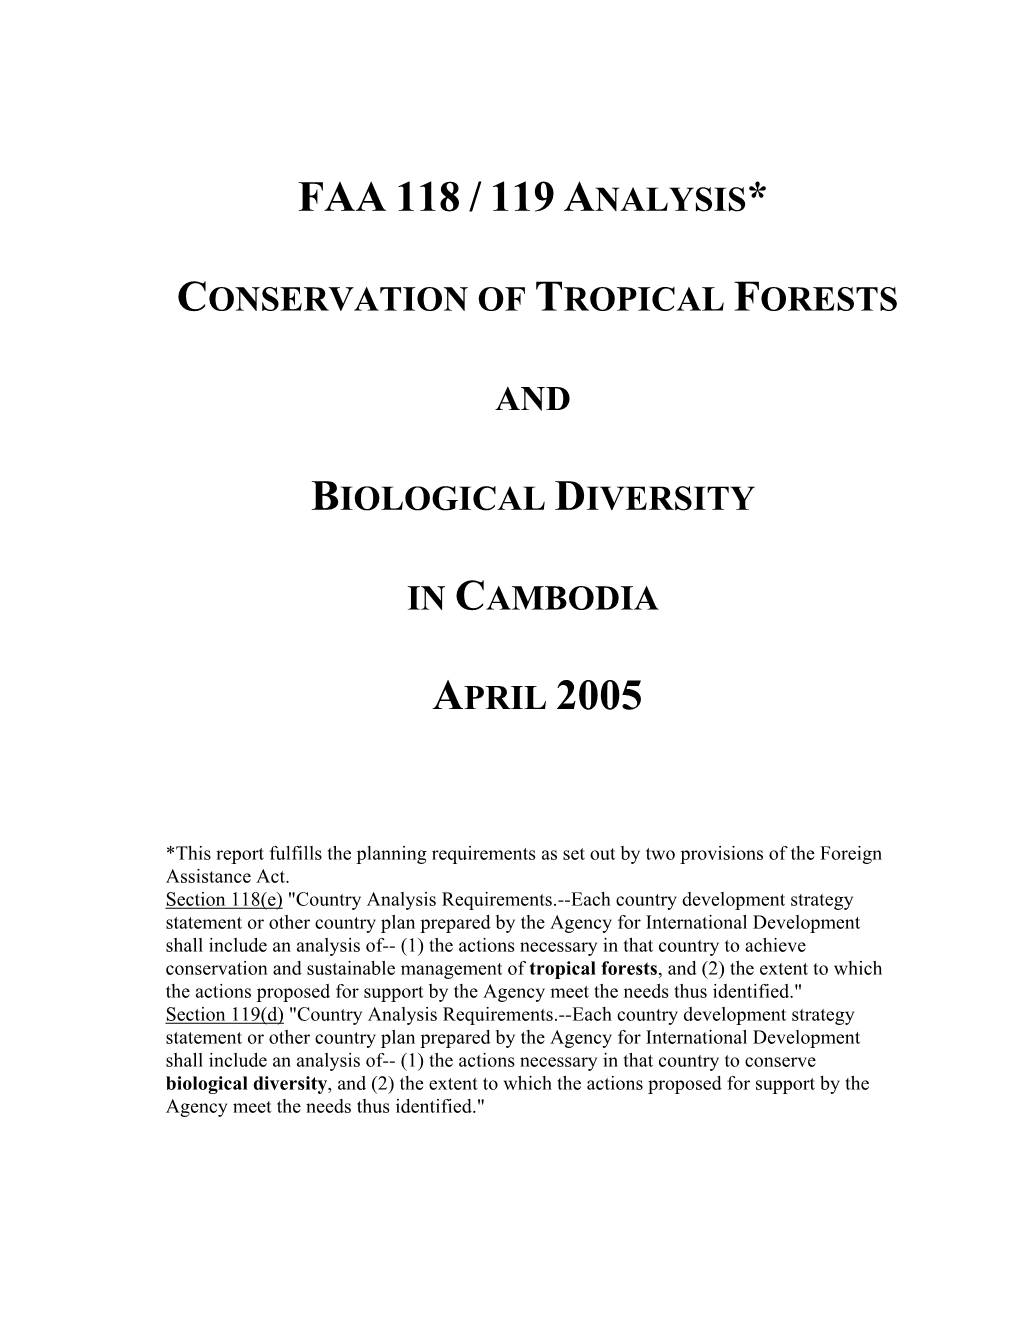 USAID-Cambodia Forest and Biodiversity